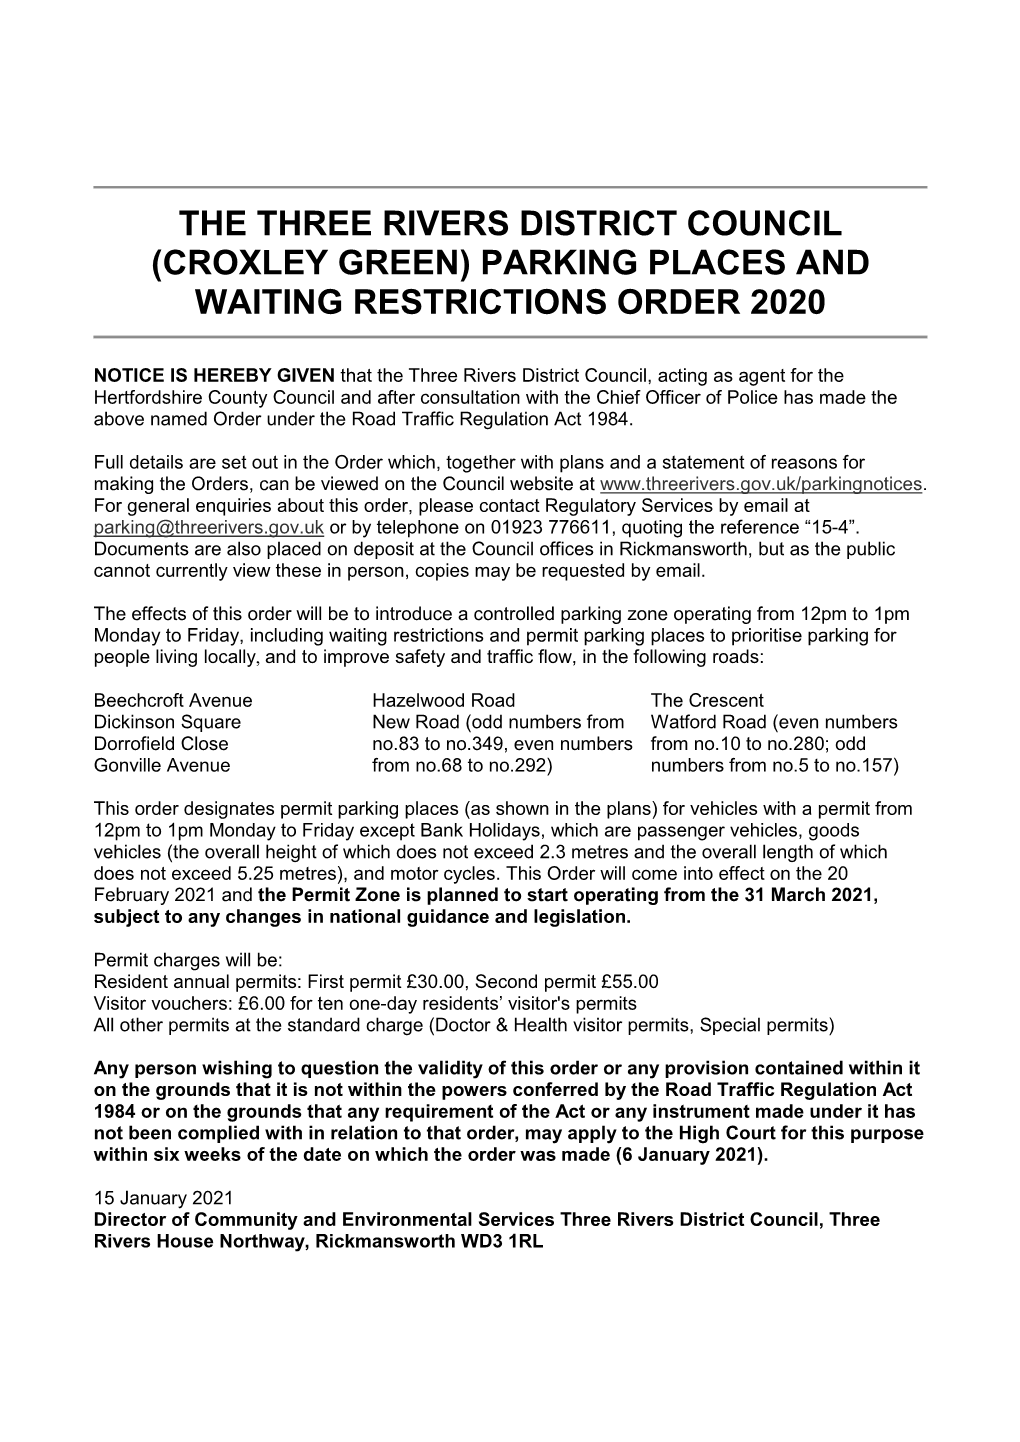 The Three Rivers District Council (Croxley Green) Parking Places and Waiting Restrictions Order 2020